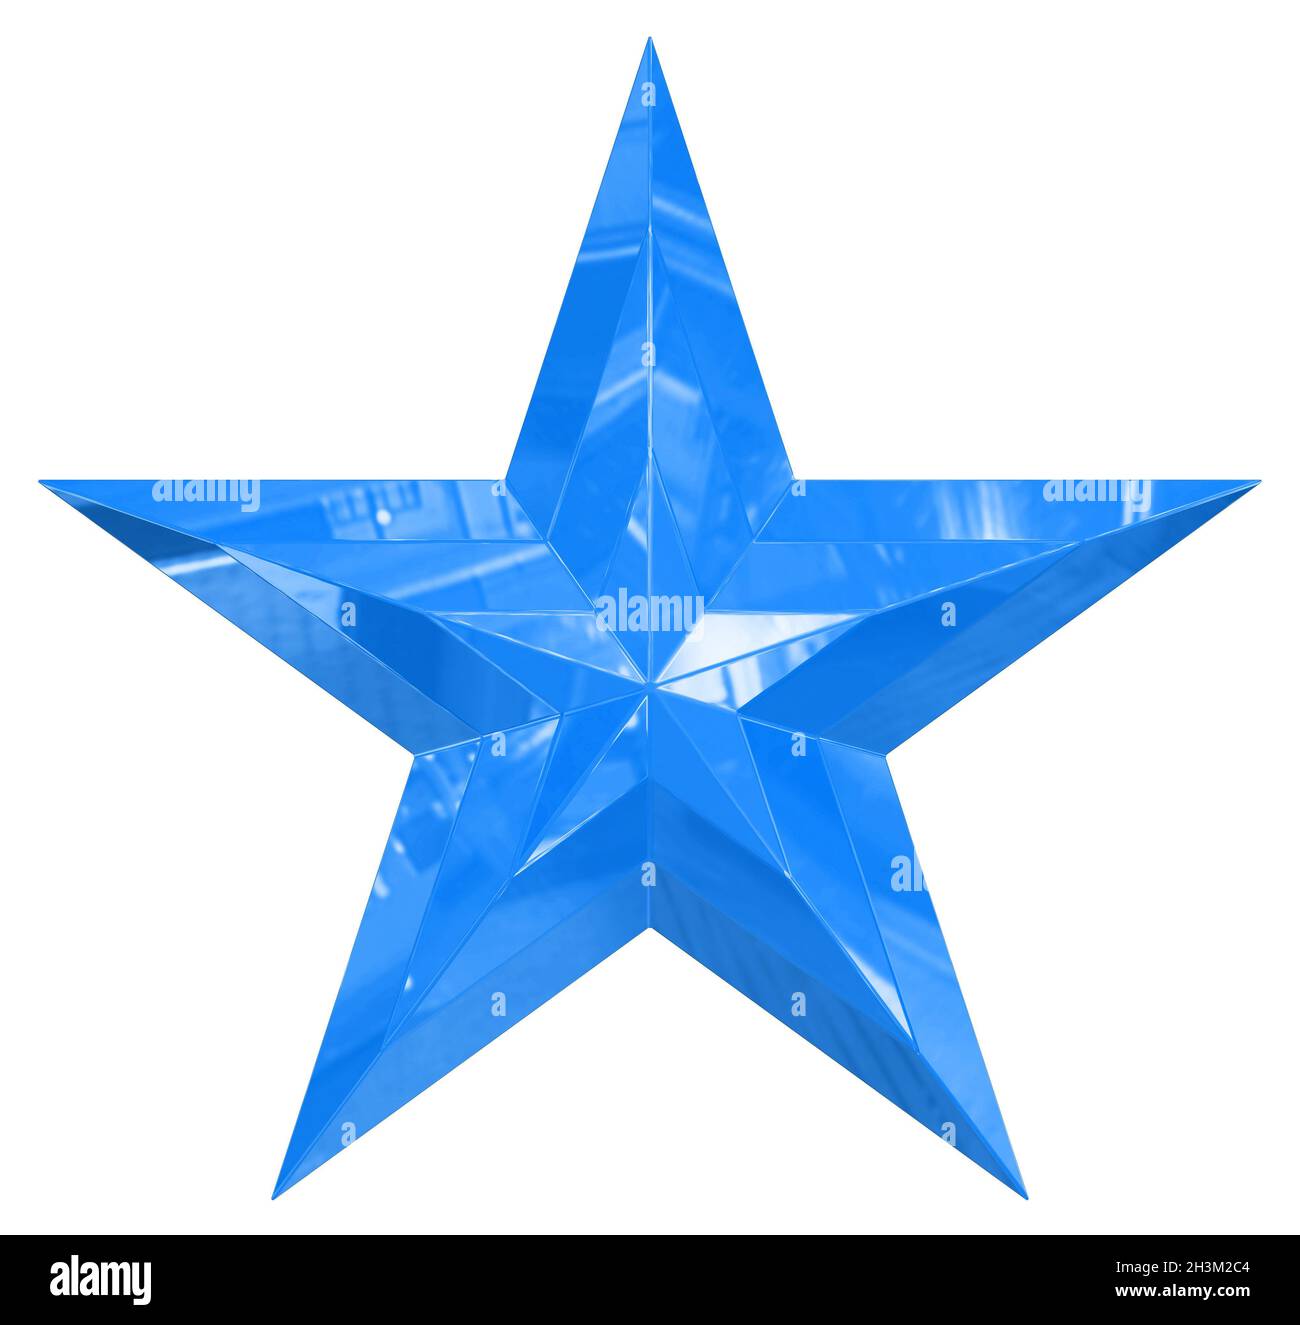 5 point star - Christmas Star - blue single isolated on white background - 3d rendering Stock Photo